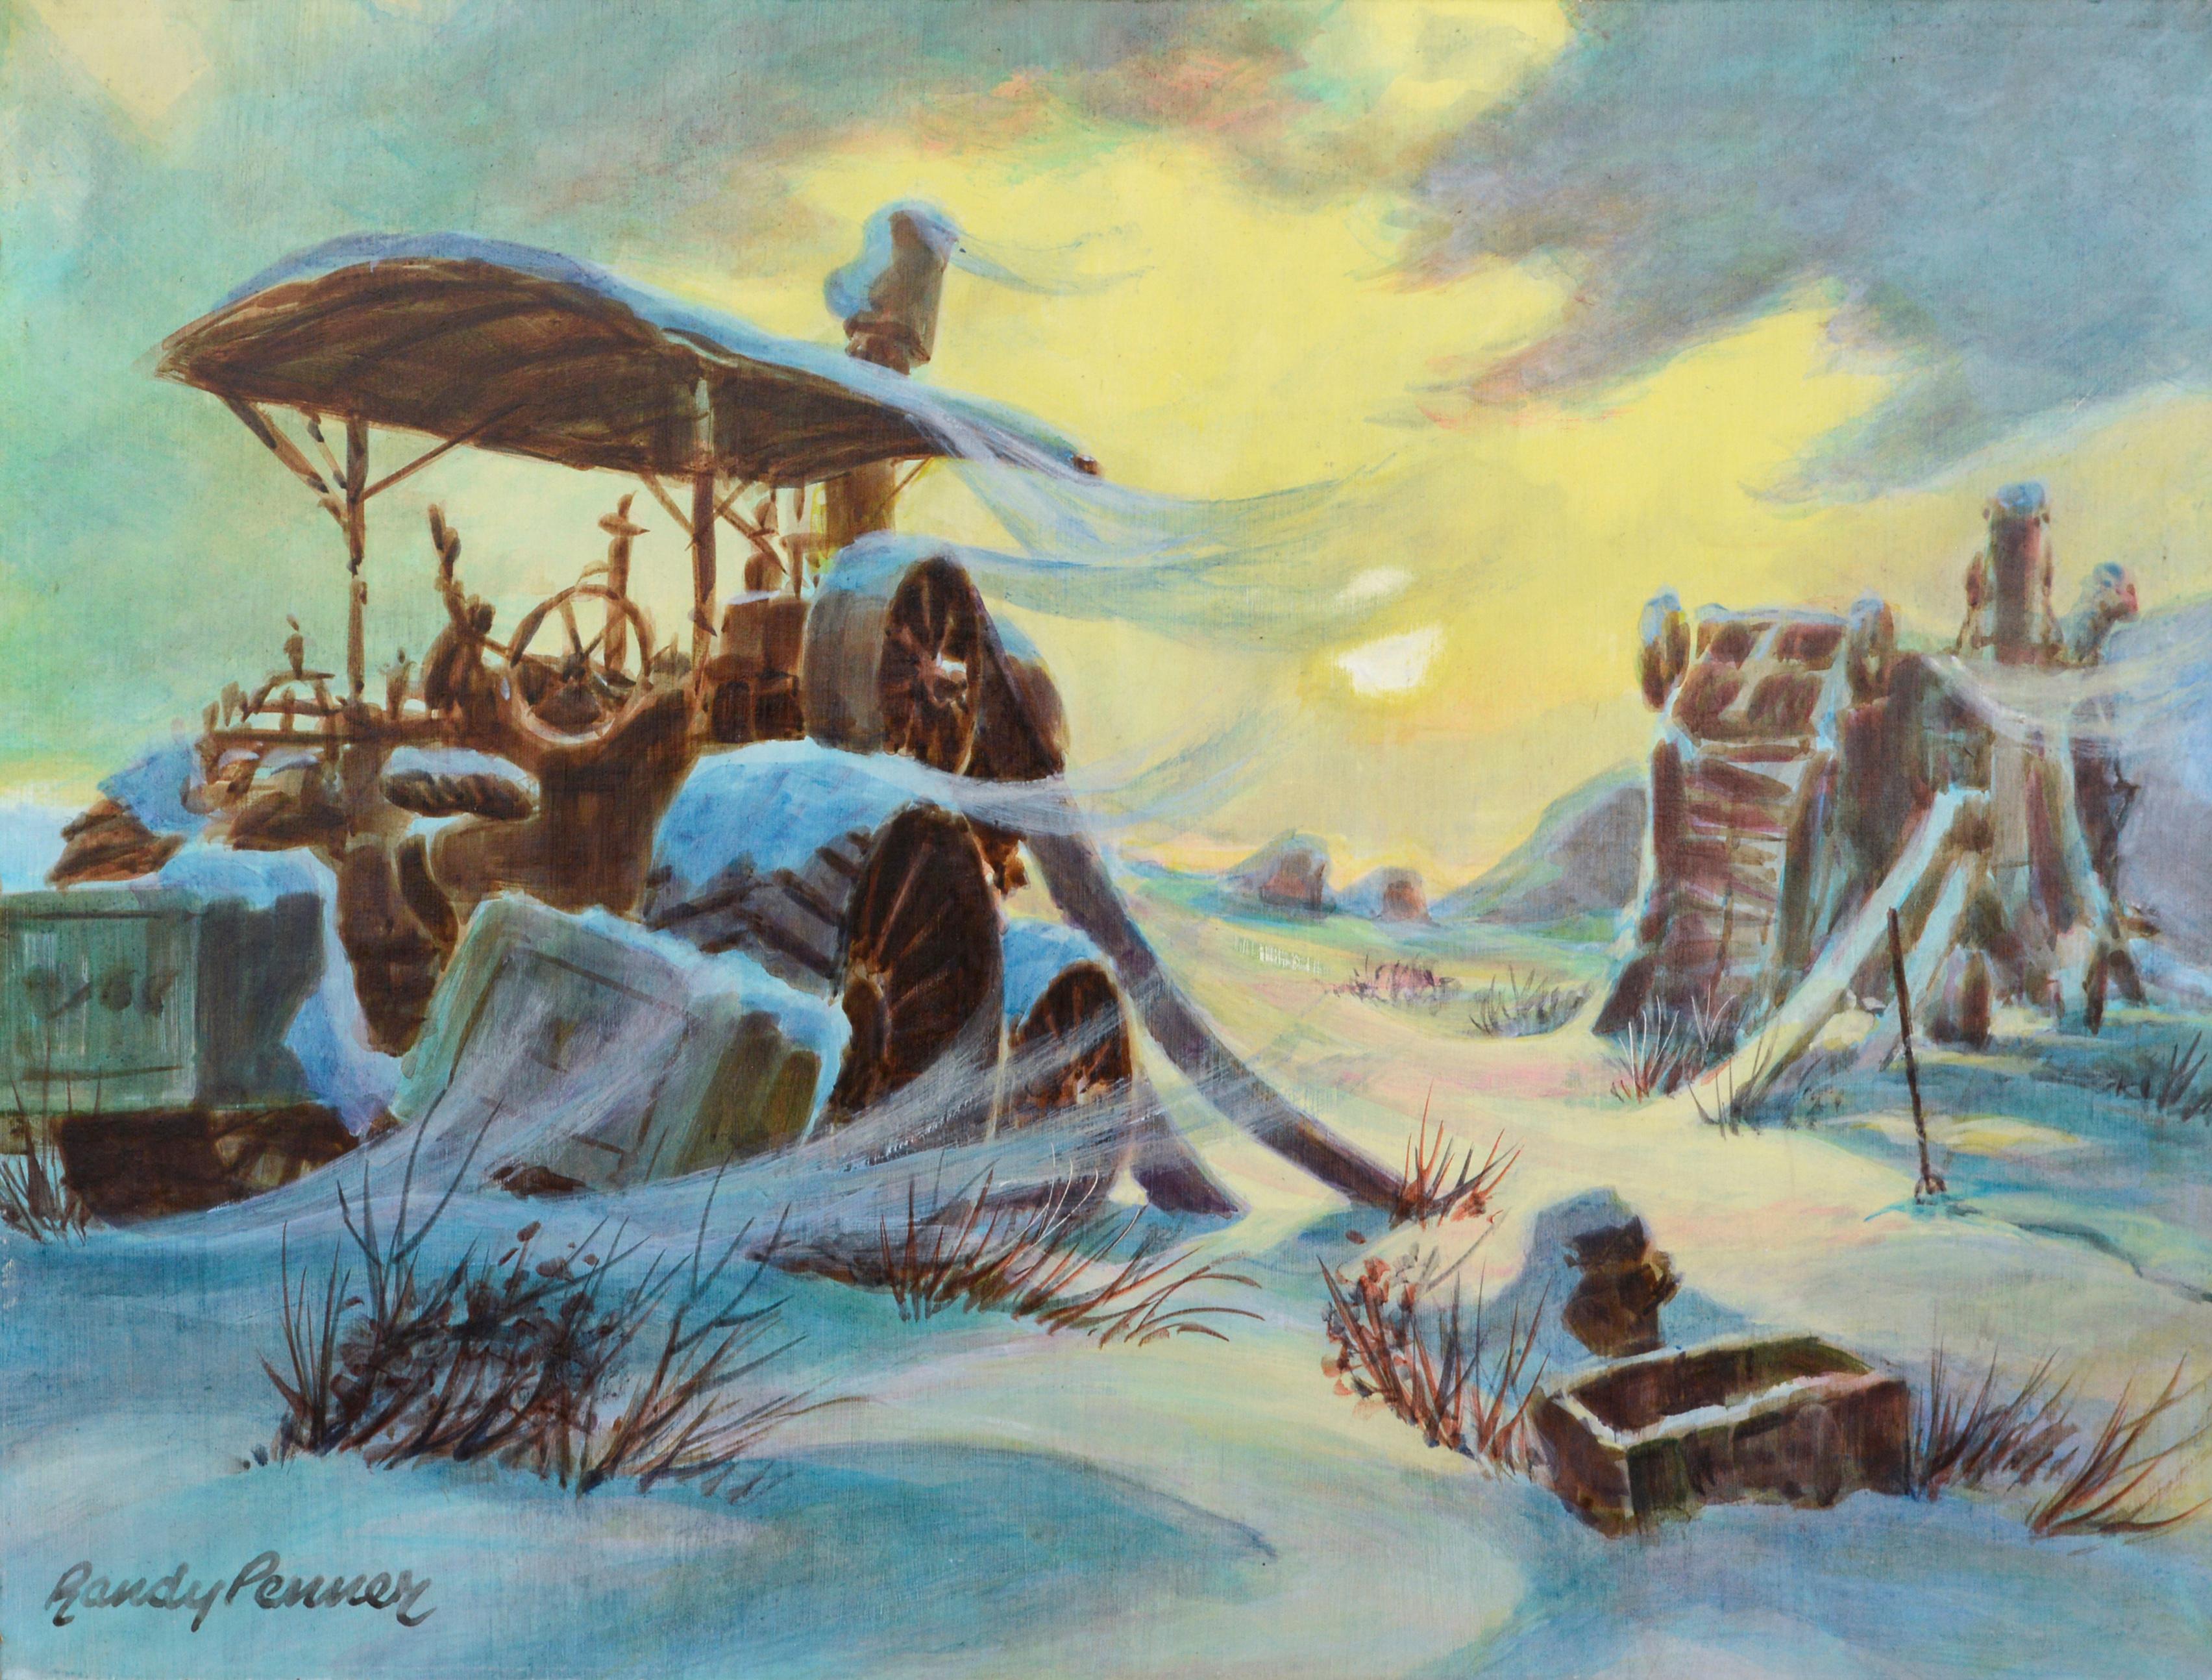 Randy Penner Landscape Painting - Harvester at the Mill in Winter - Landscape